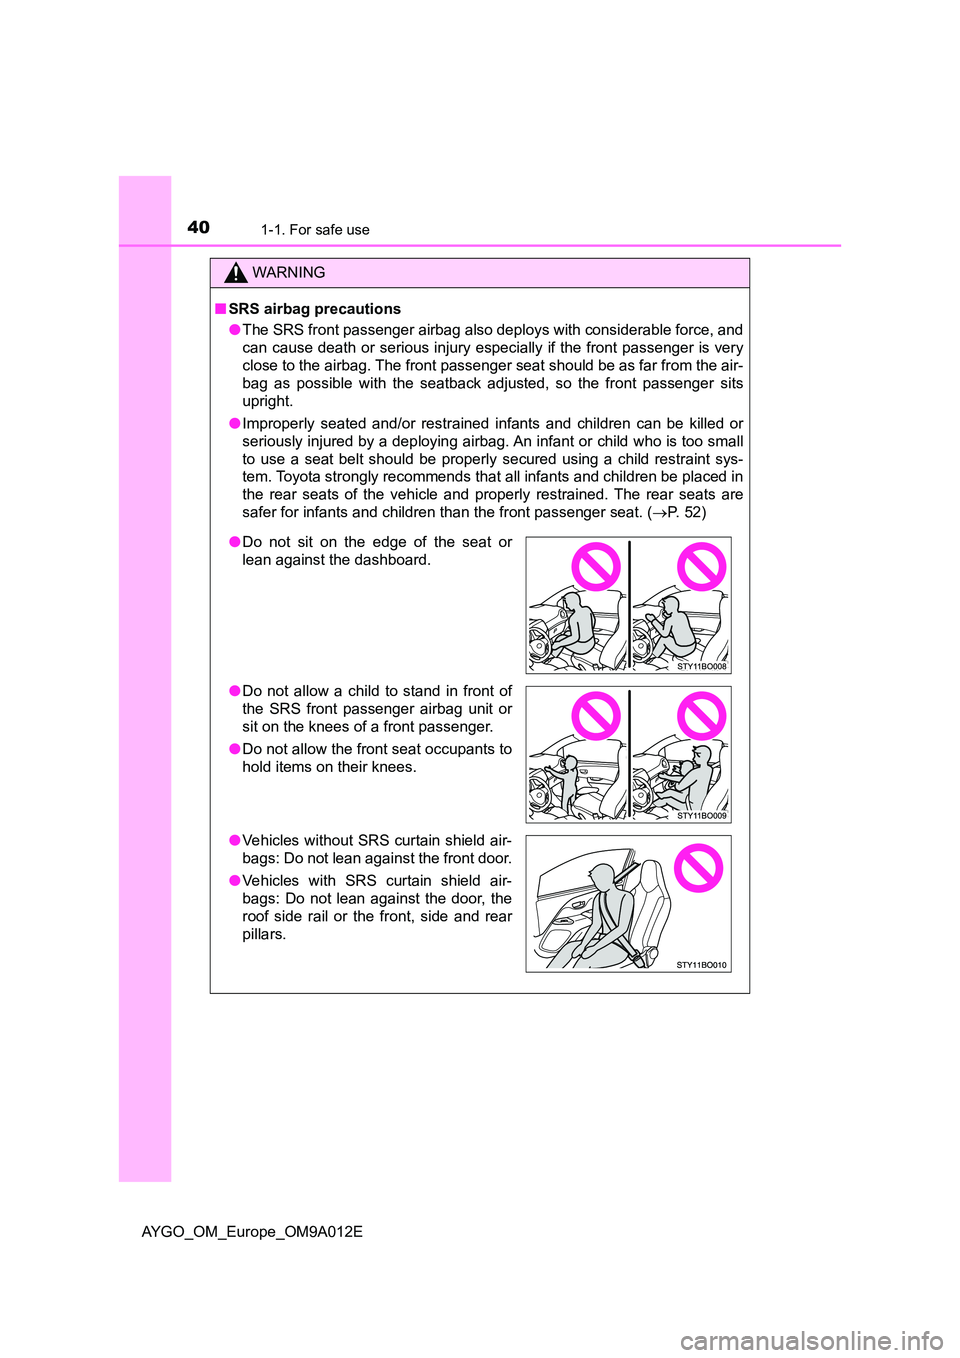 TOYOTA AYGO 2021  Owners Manual 401-1. For safe use
AYGO_OM_Europe_OM9A012E
WARNING
■SRS airbag precautions 
● The SRS front passenger airbag also deploys with considerable force, and 
can cause death or serious injury especiall